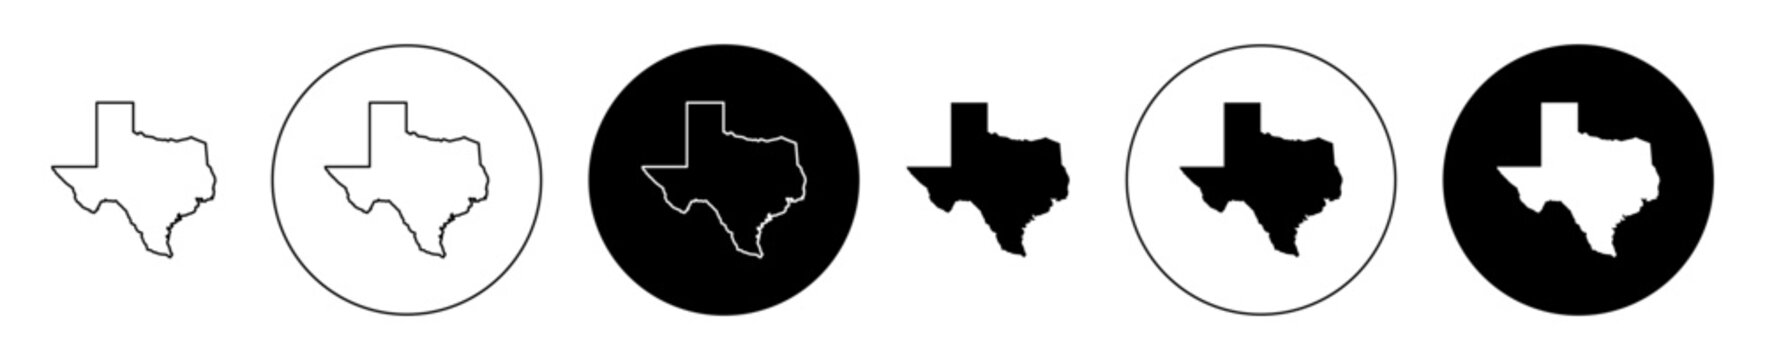 Texas icon set in black filled and outlined style. suitable for UI designs